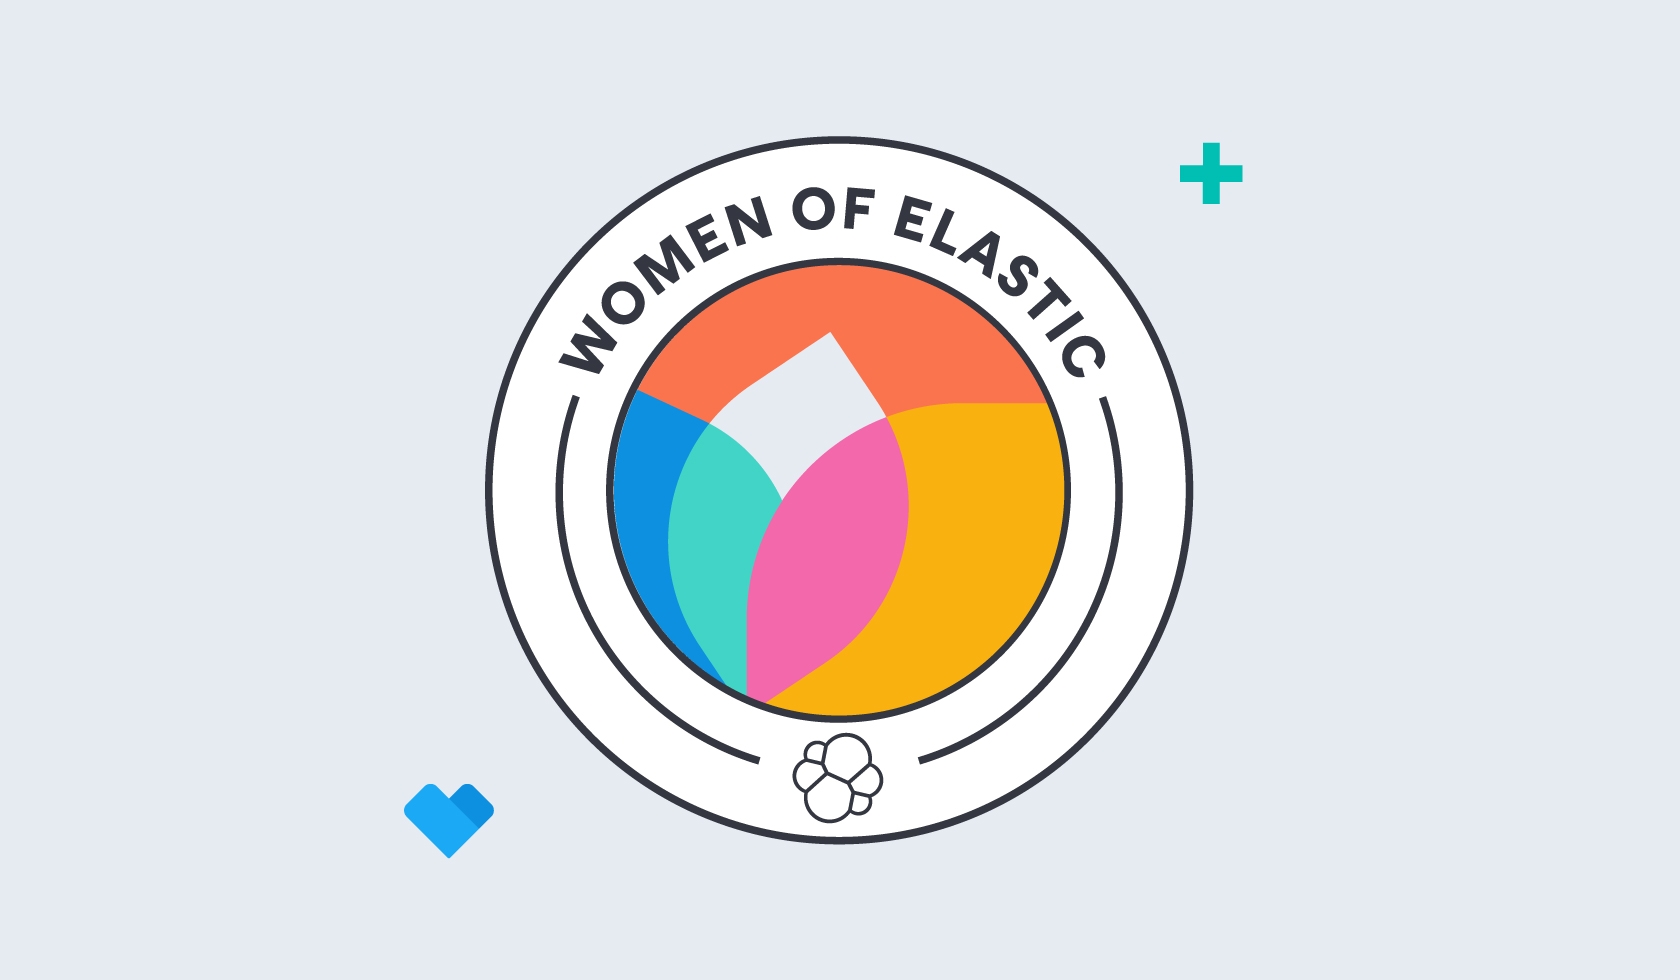 ERGs encourage you to come as you are: Meet Women of Elastic